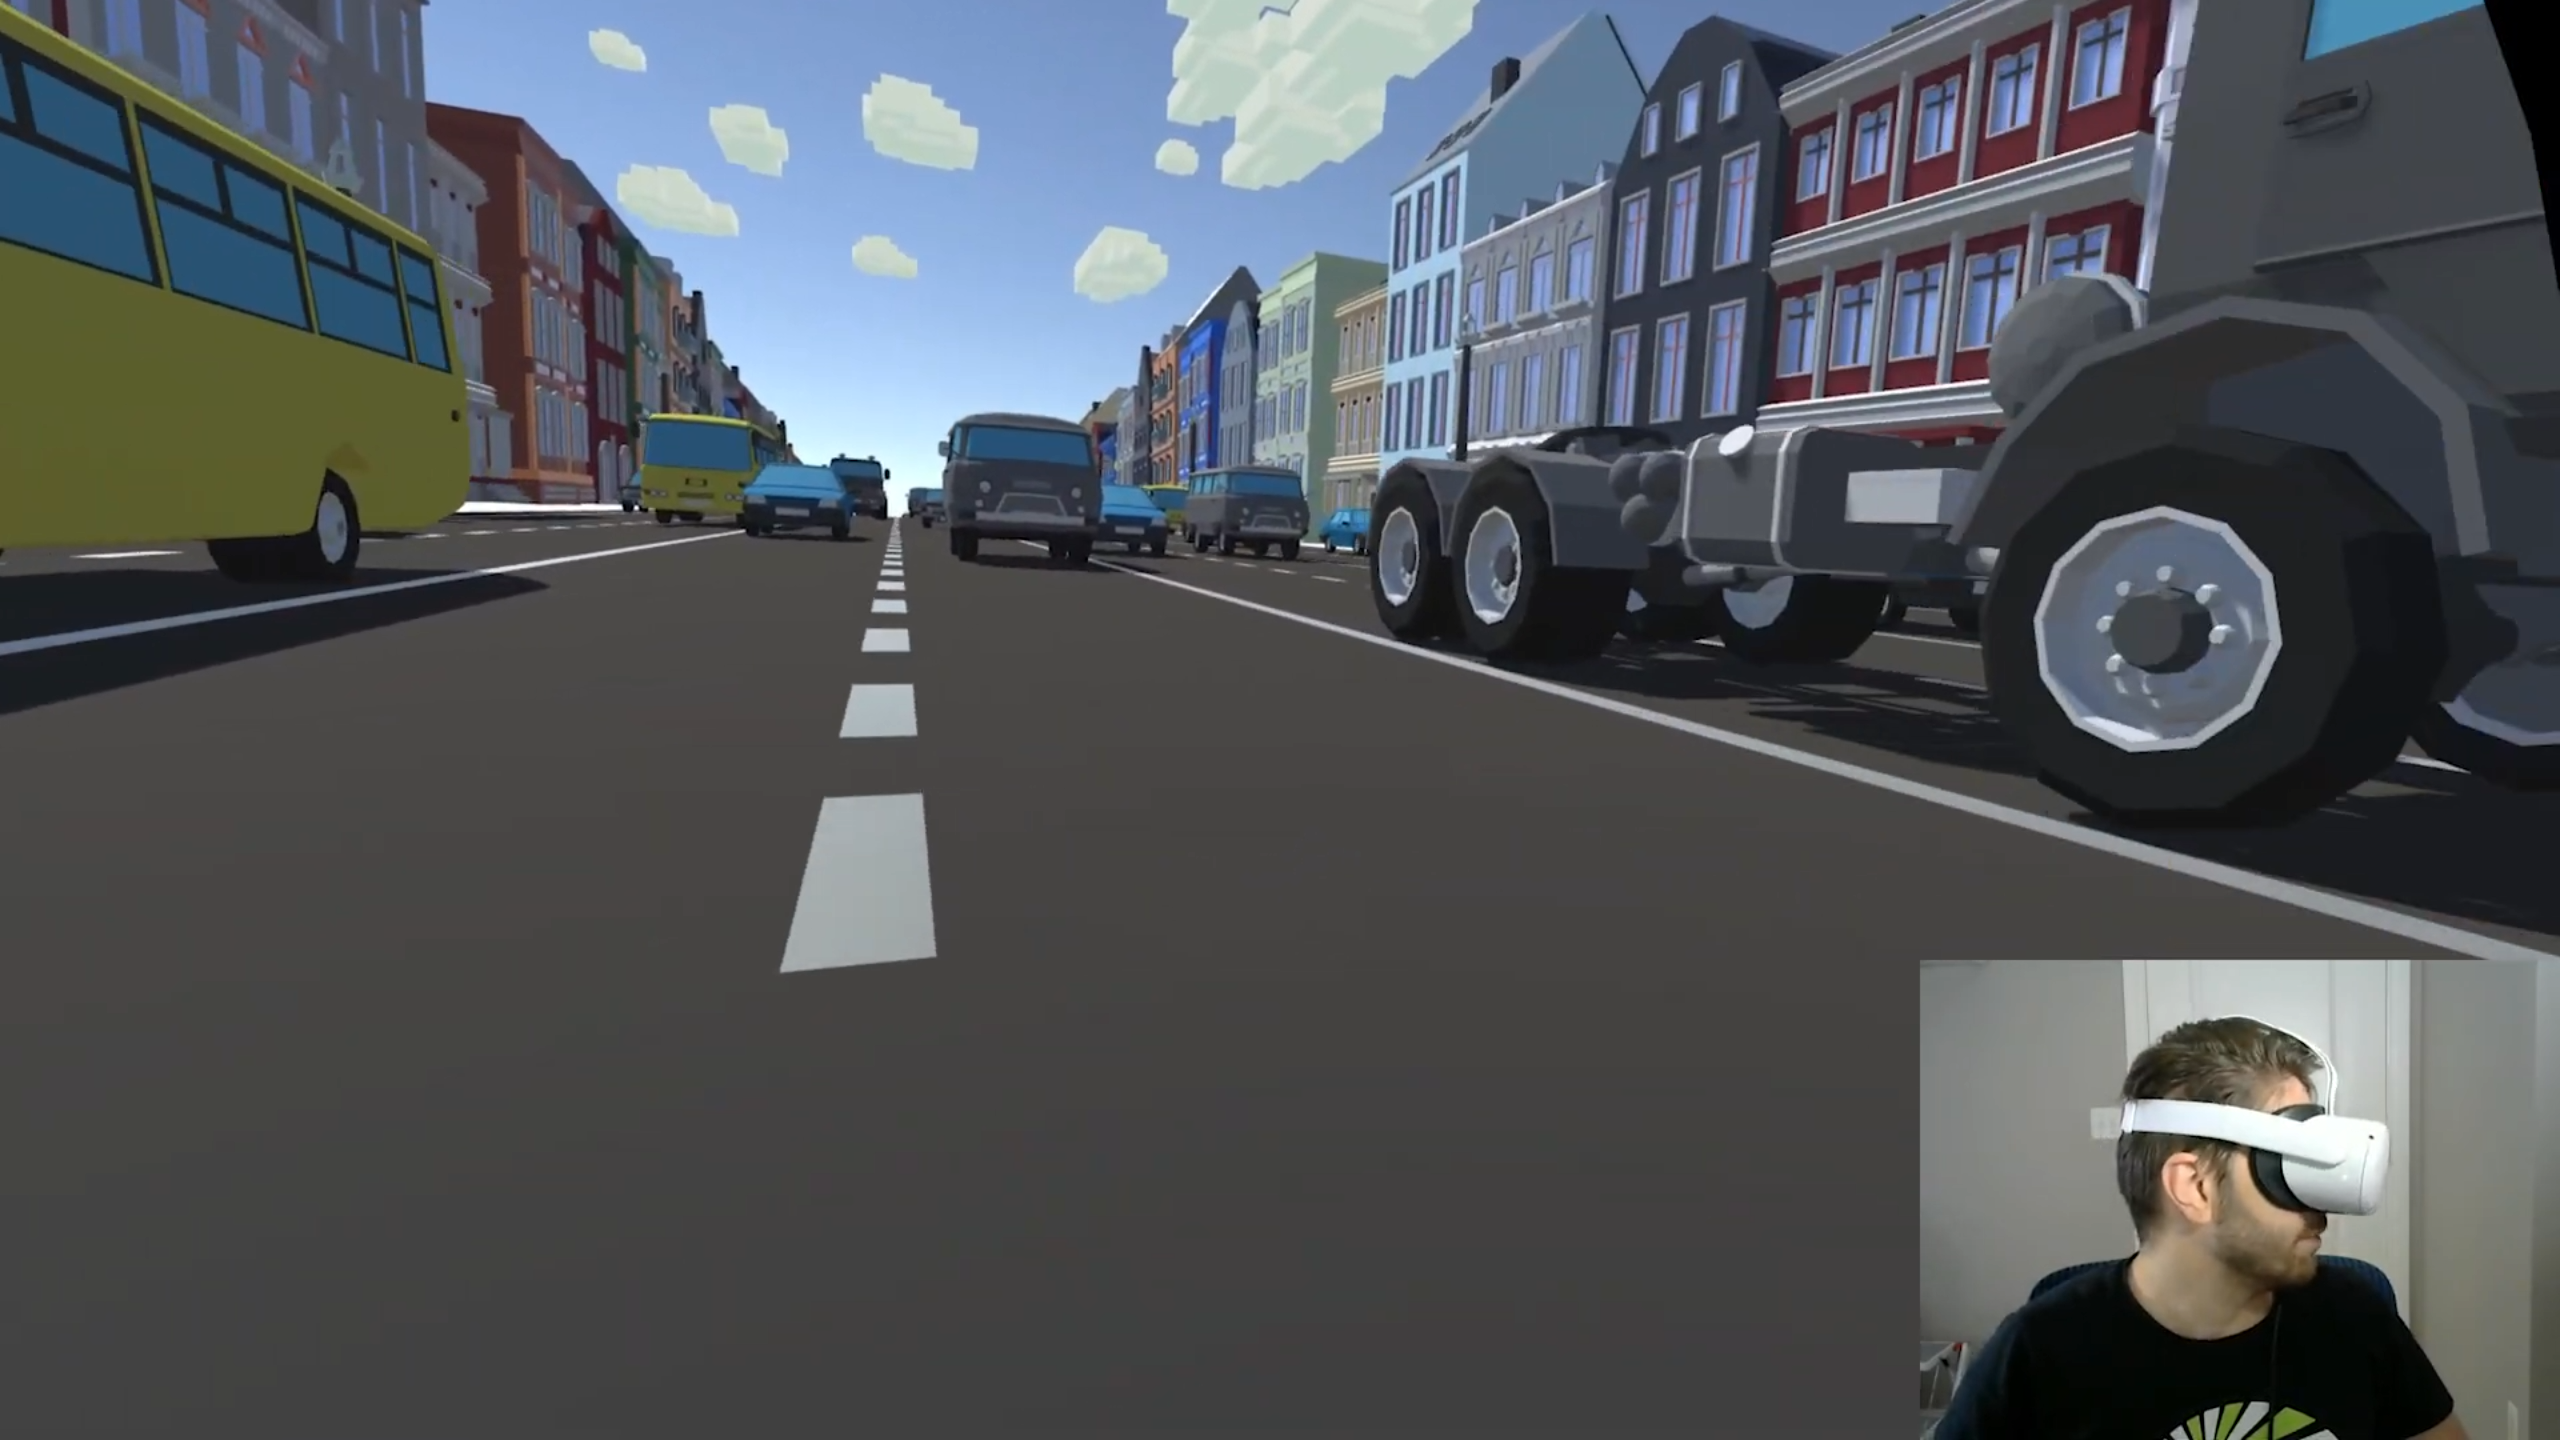 Why Did The Chicken Cross The Road? – Virtual Reality Game